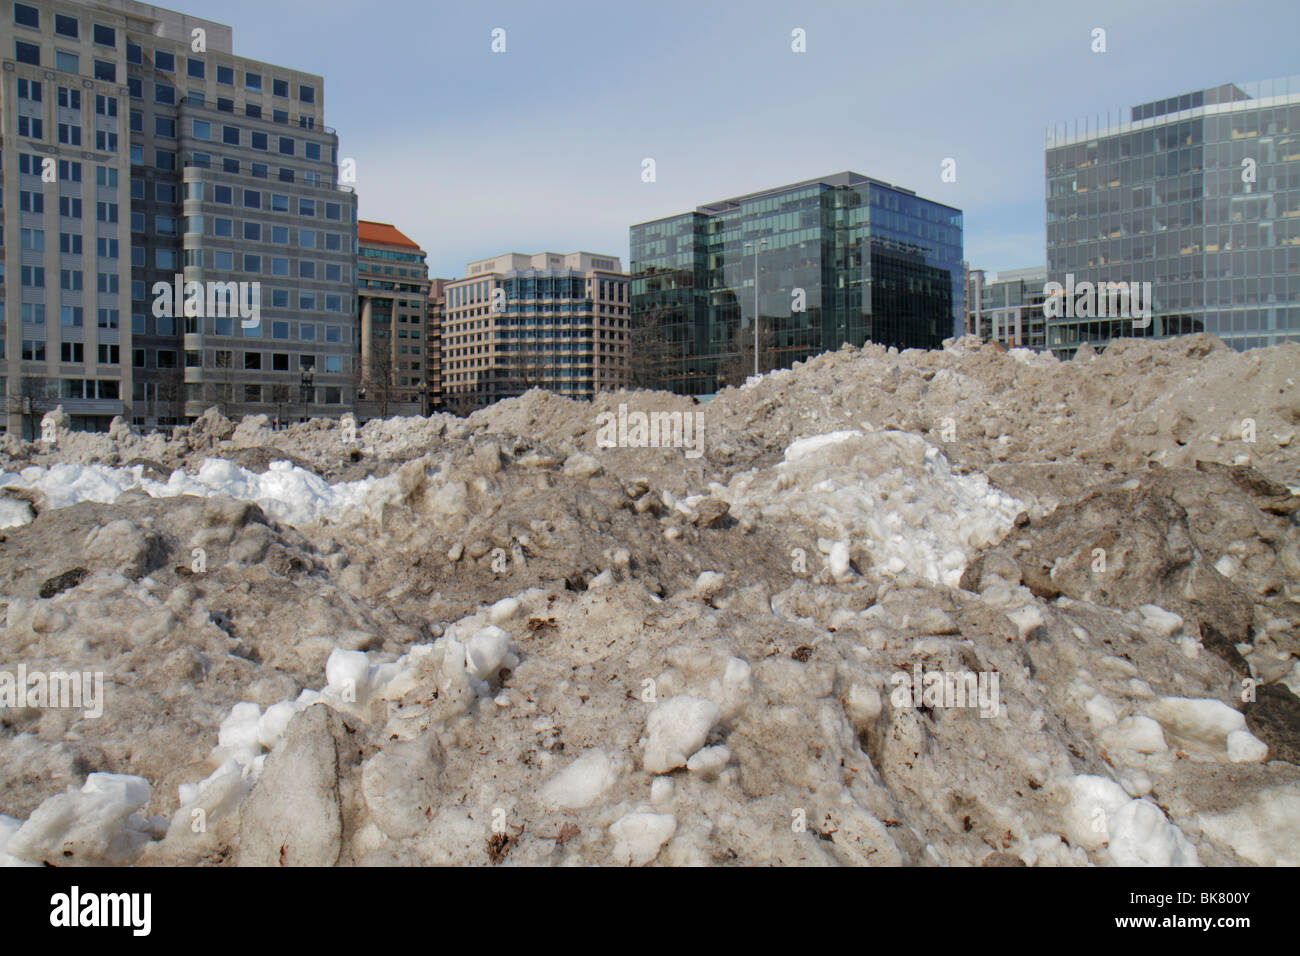 Washington DC,10th Street NW,Dirty,Grimy,Snow,arowed,Ice,thawing,Melting,Wet,Pollution,Winter,COLD,Weather,Parking lot,Office buildings,City skyline,p Foto Stock